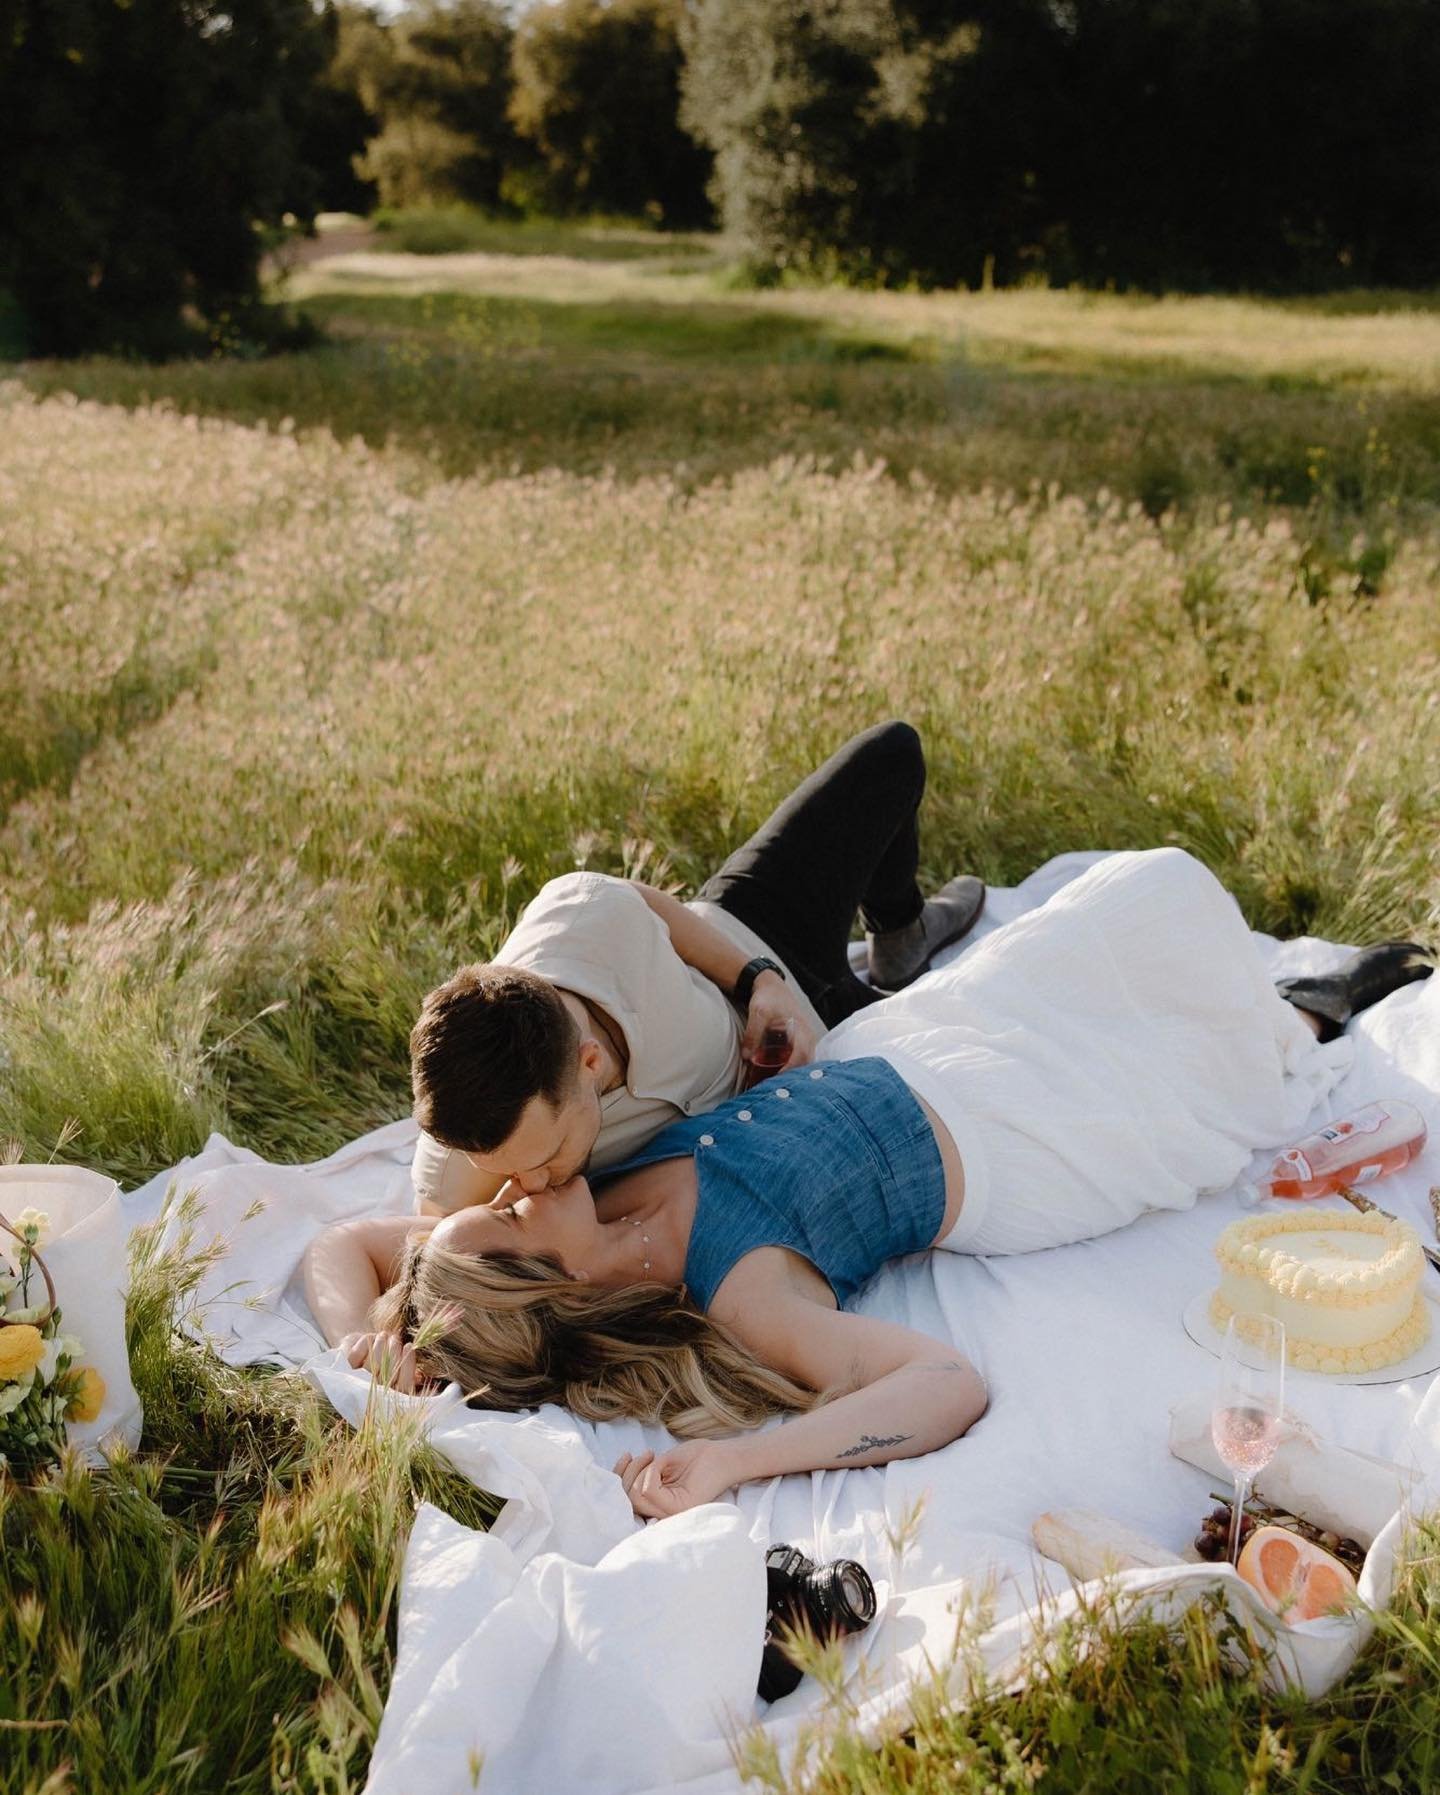 It&rsquo;s that perfect time of year for picnic snuggles. We loved celebrating these two on their 2nd wedding anniversary! 
Cheers to celebrating love
It&rsquo;s what we do best 
And what a fun thing to be good at 🤍🥂
.
.
Always love taking their ph